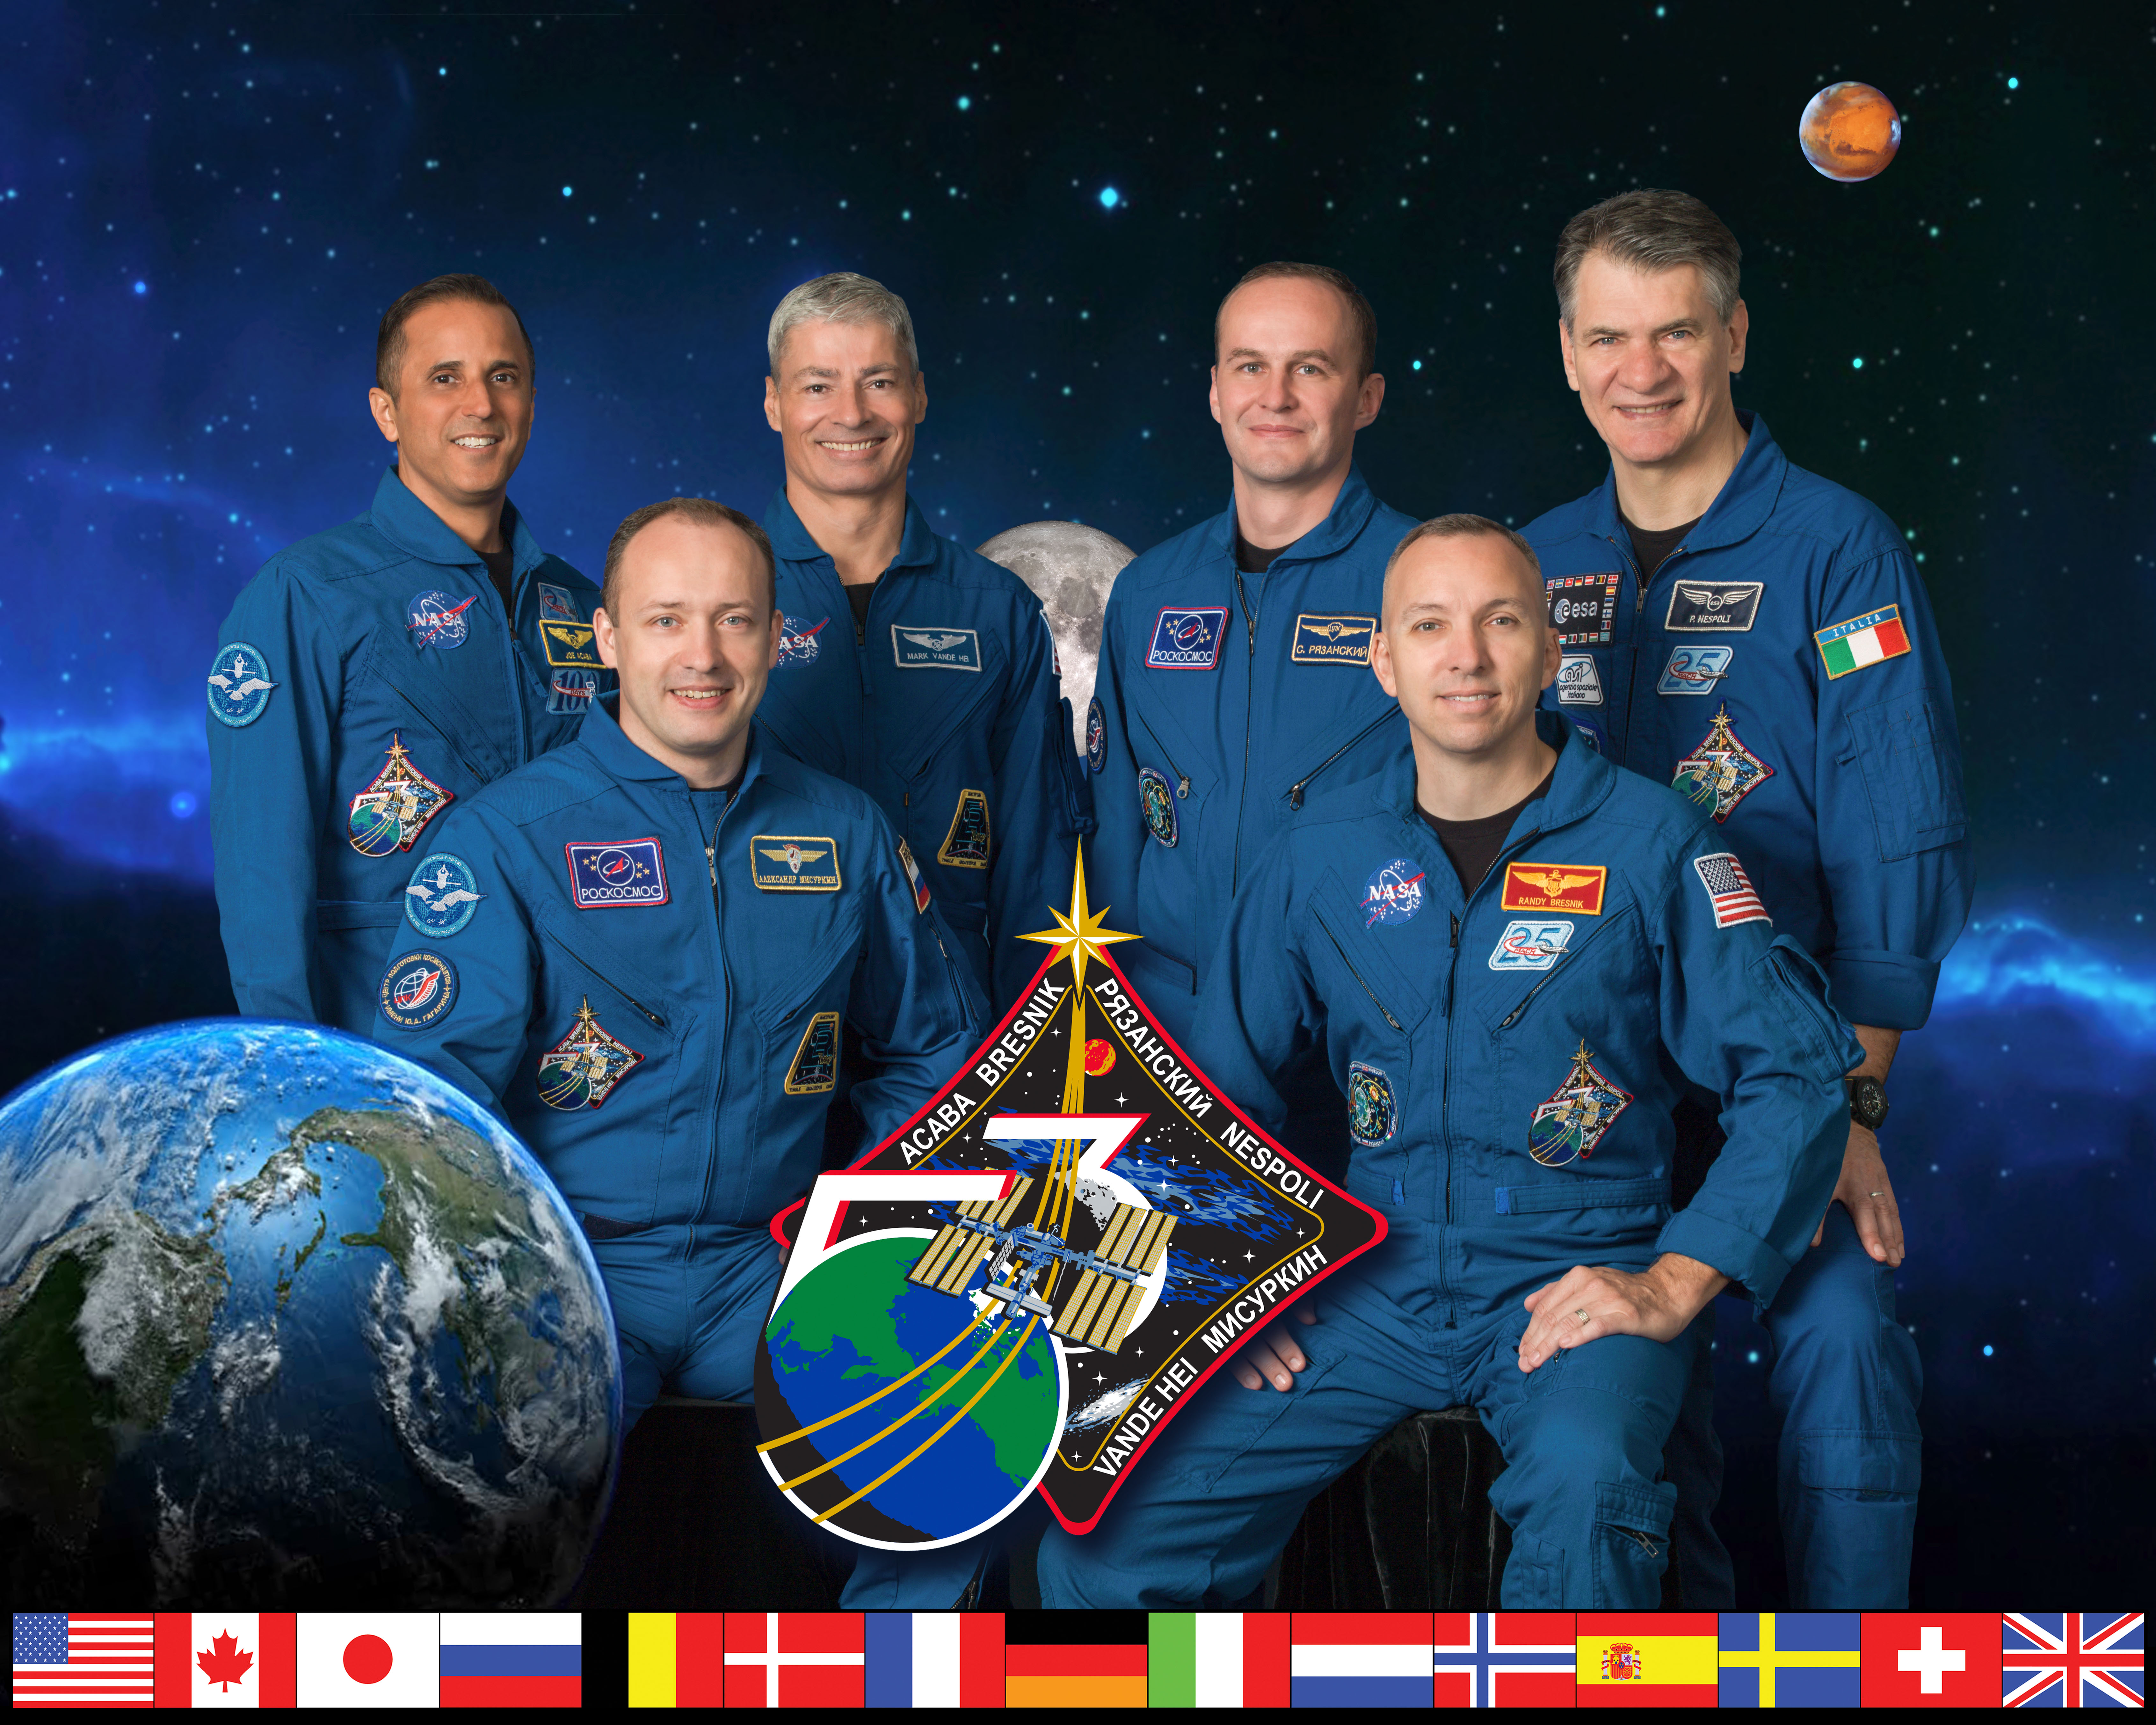 Expedition 53 Official Crew Portrait